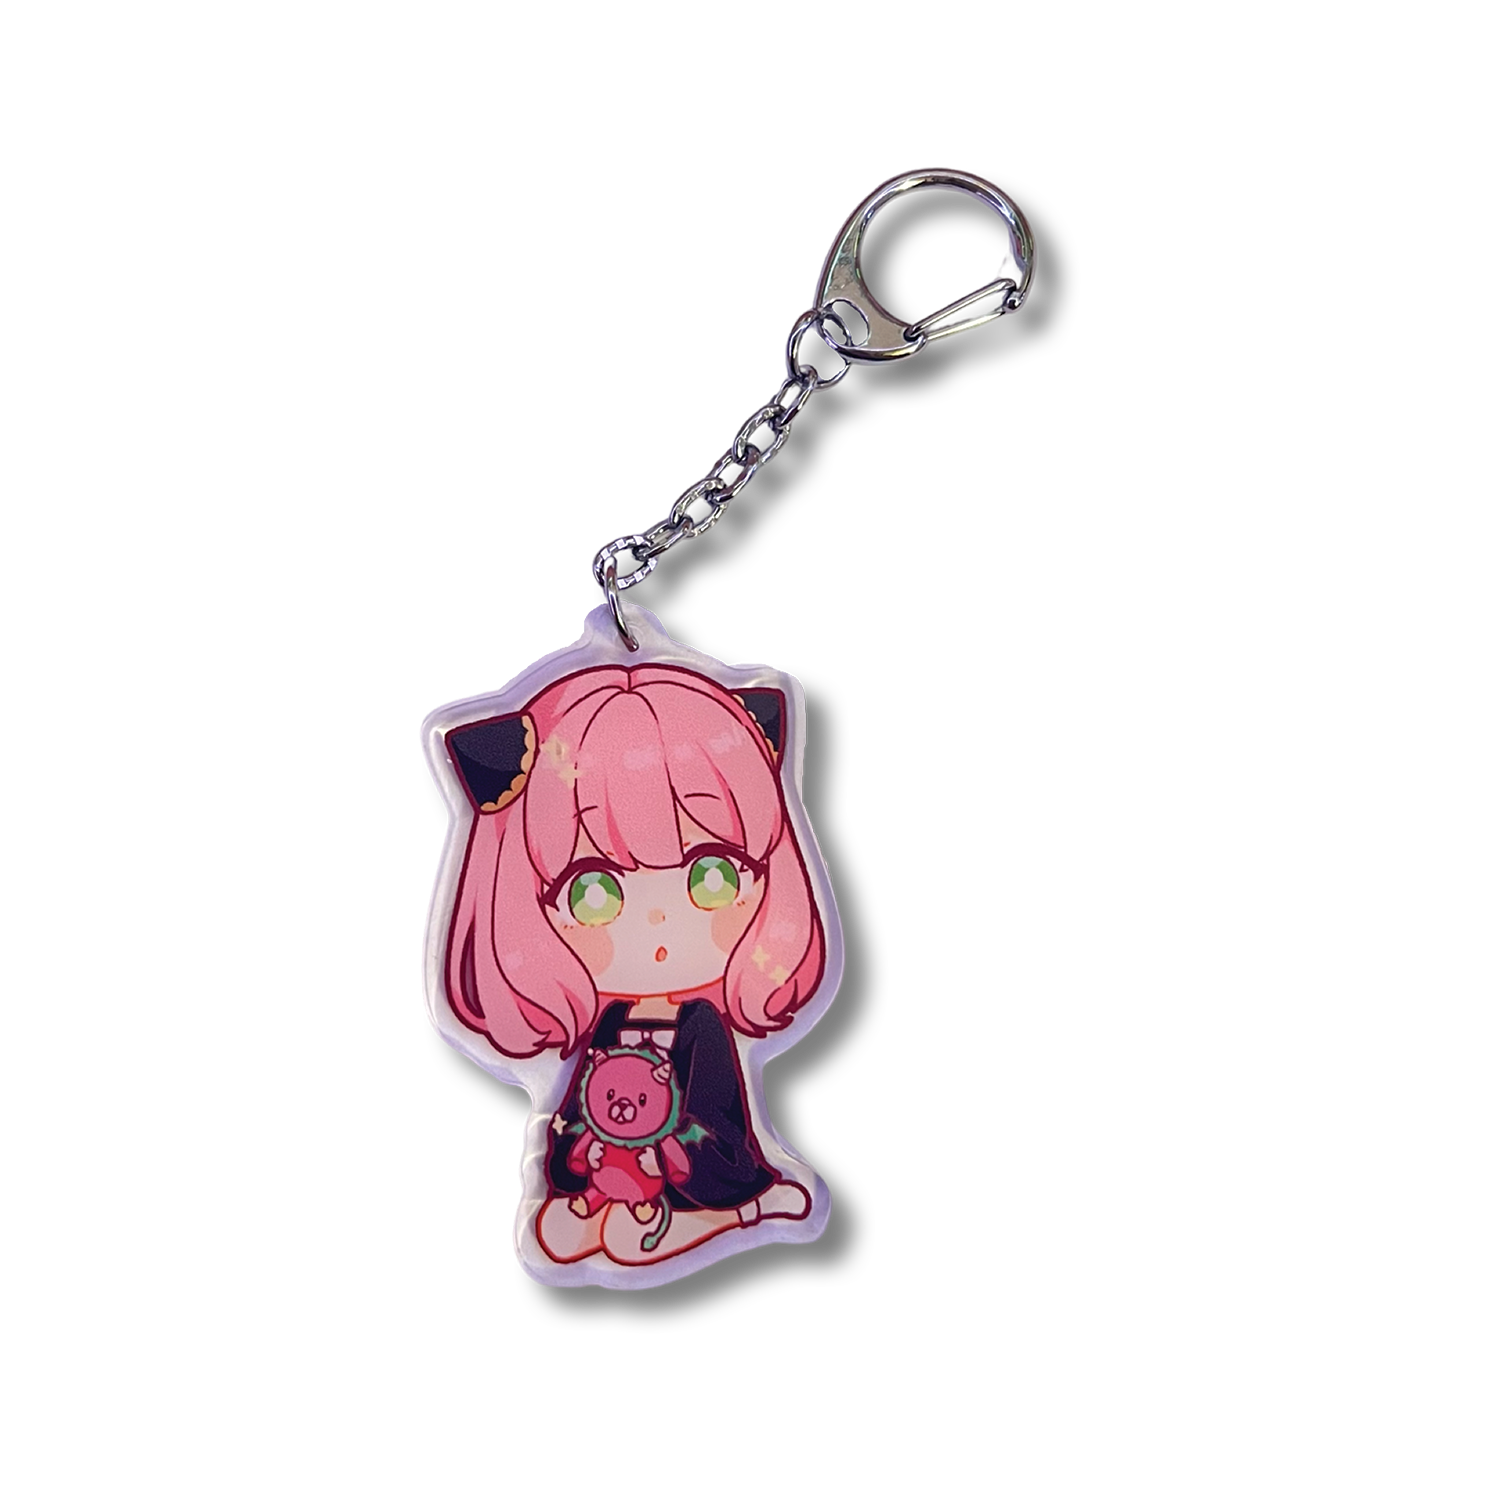 Anya Plushie Keychain design features Anya Forger from Spy x Family holding a chimera plushie in a sitting position.